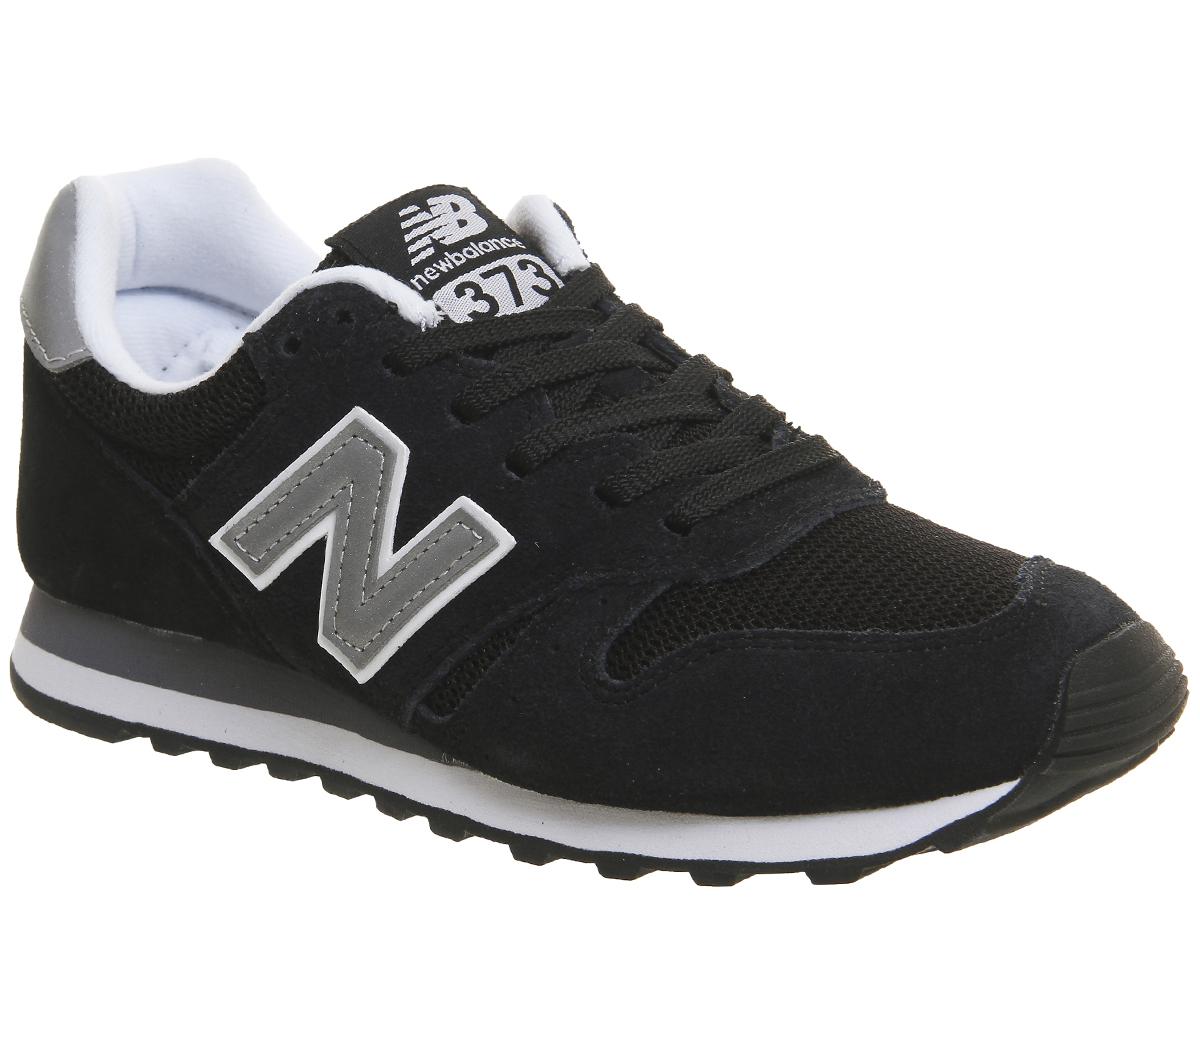 New Balance 373 Trainers Black Silver 